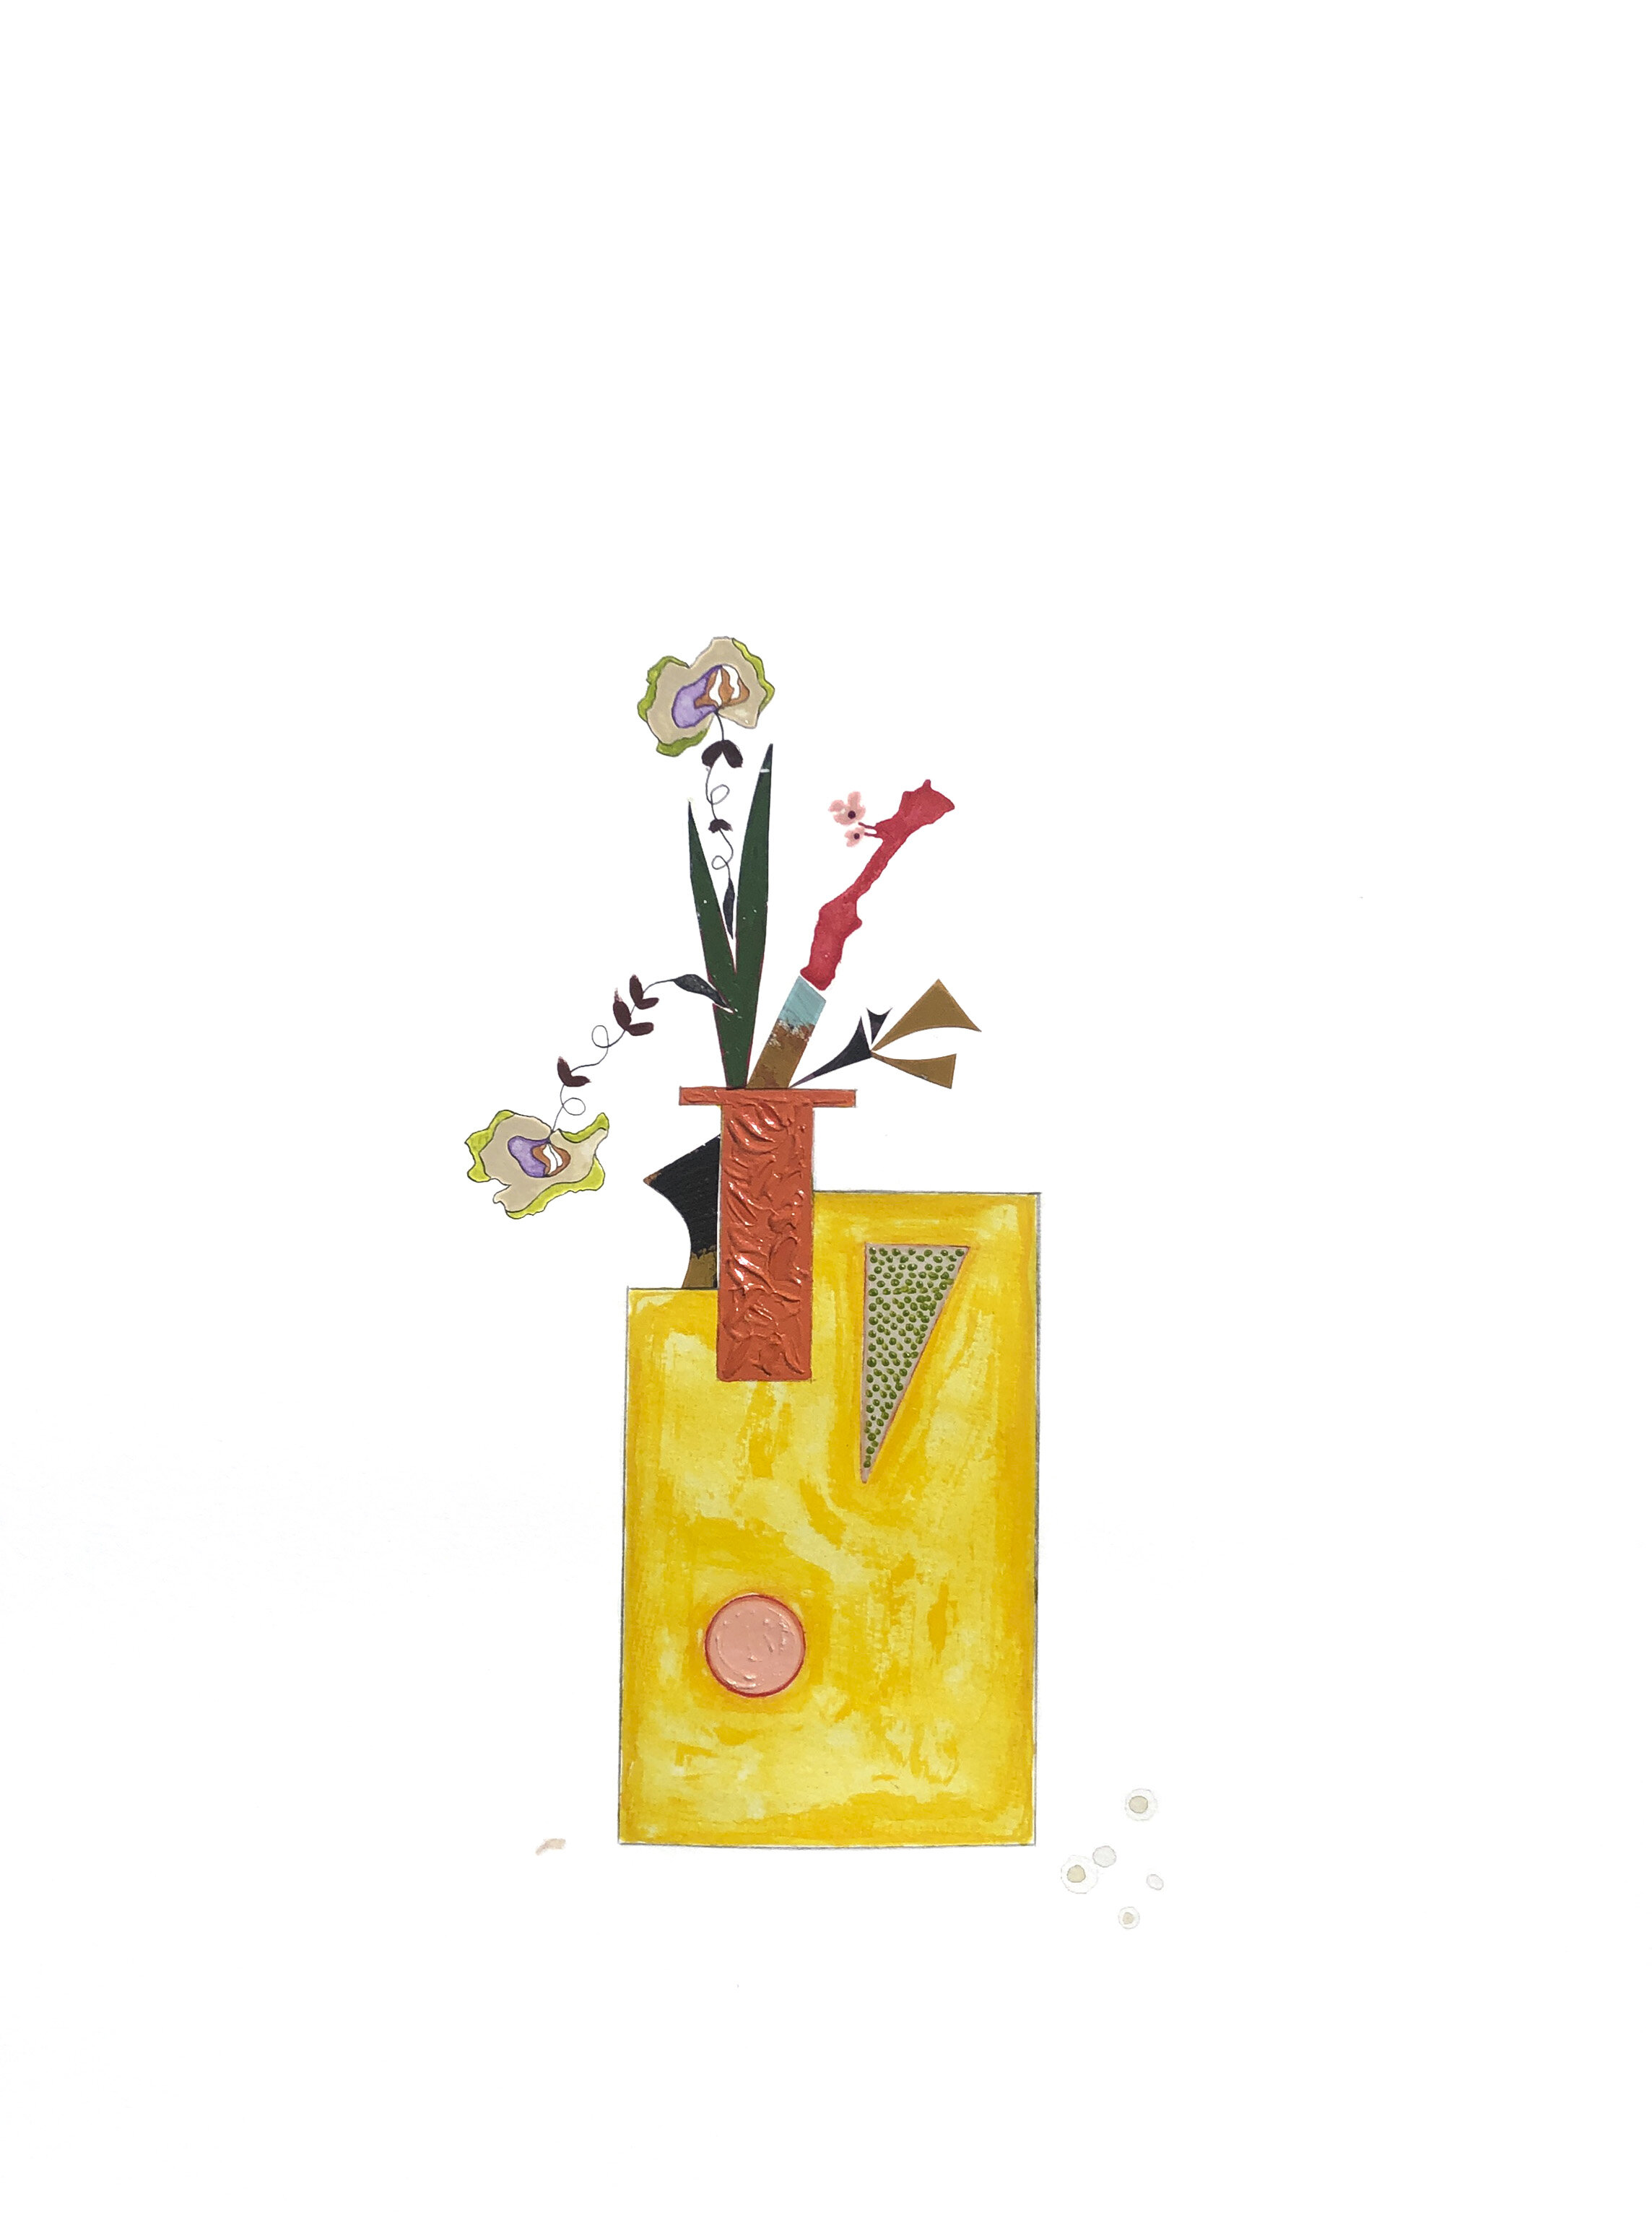    Yellow Vase + Red Branch  , 2019  Mixed media on paper  24 x 18 in. 